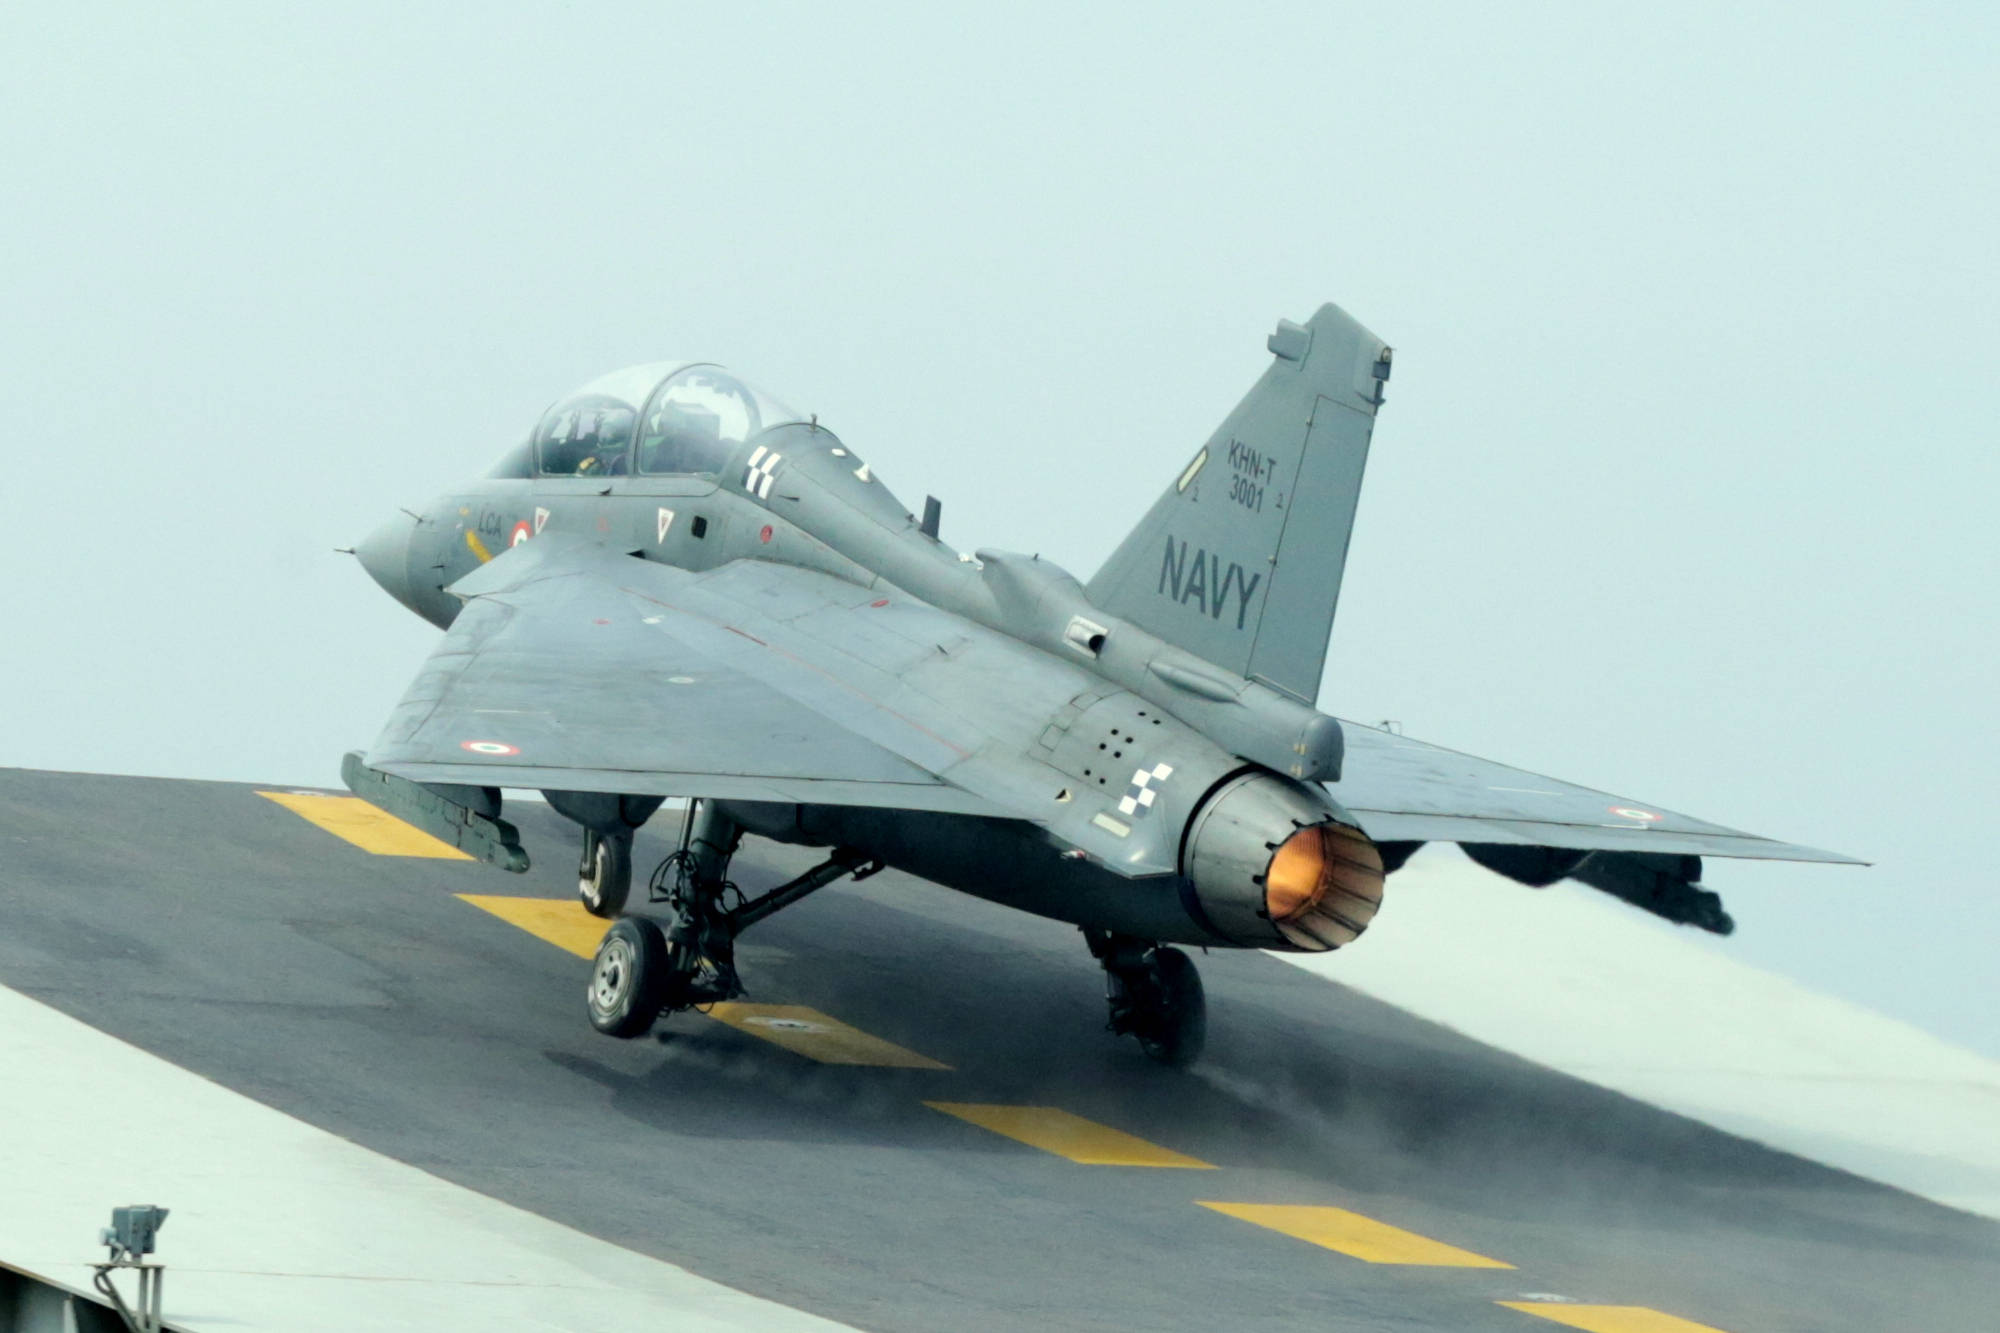 Naval Tejas fighter aircraft for carrier based fighter